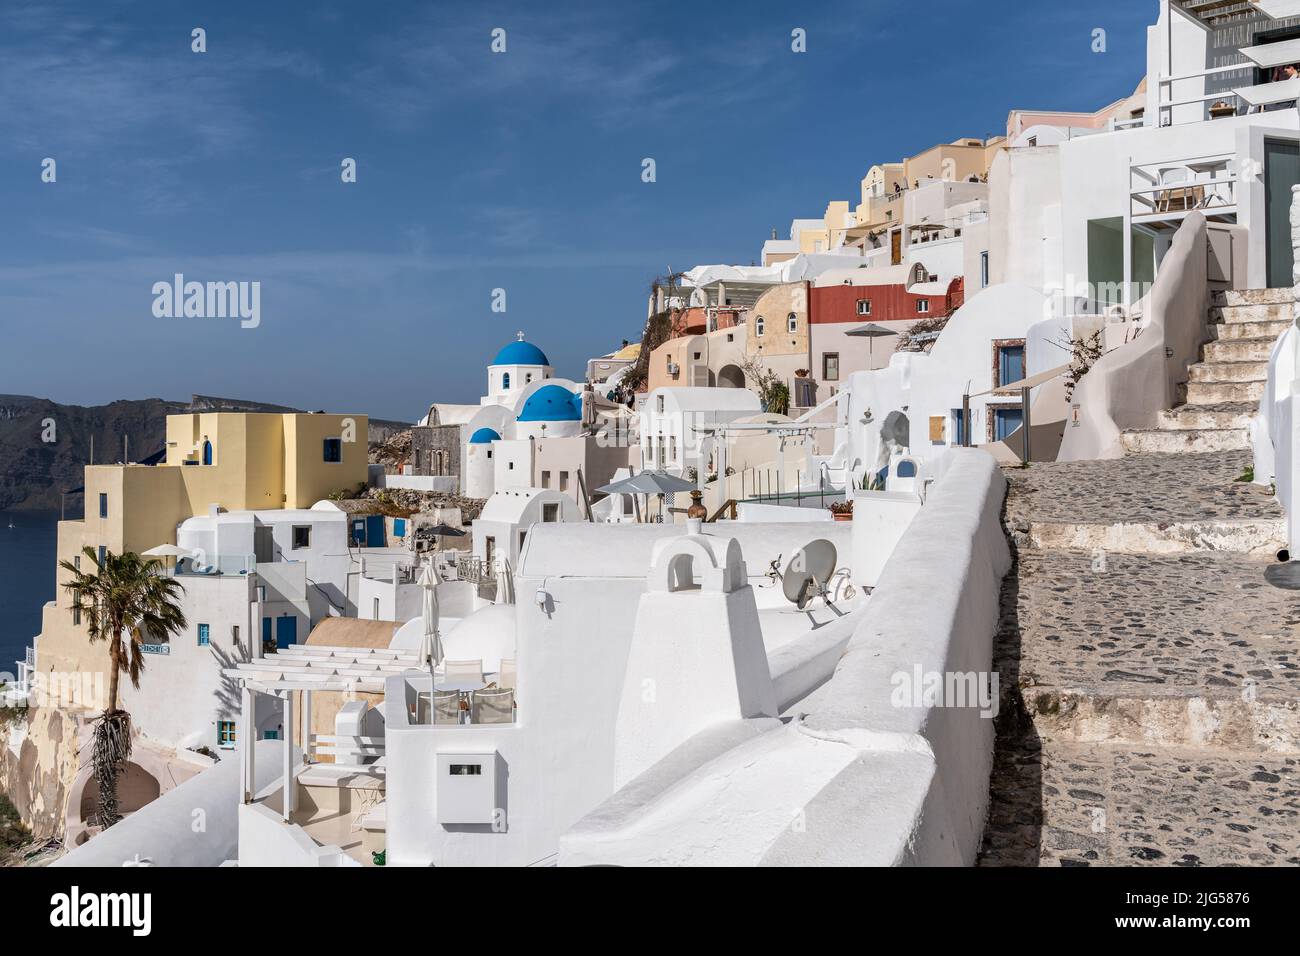 View of Oia village in Santorini with traditional white houses and blue domes churches, Greece Stock Photo